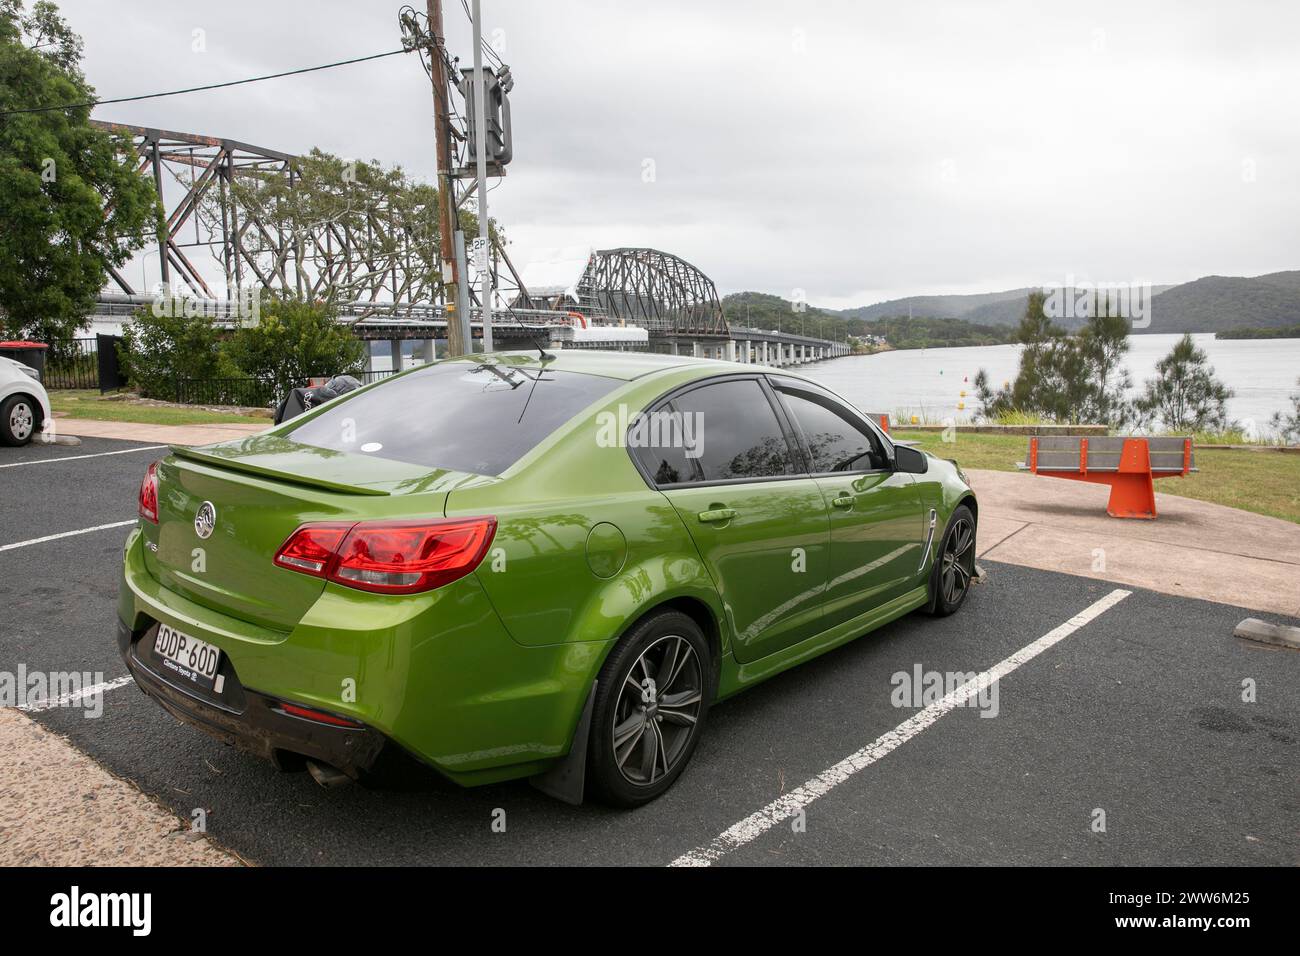 2015 Holden Commodore SV6 family sedan saloon car parked in New South Wales, Holden no longer produces vehicles,Australia Stock Photo